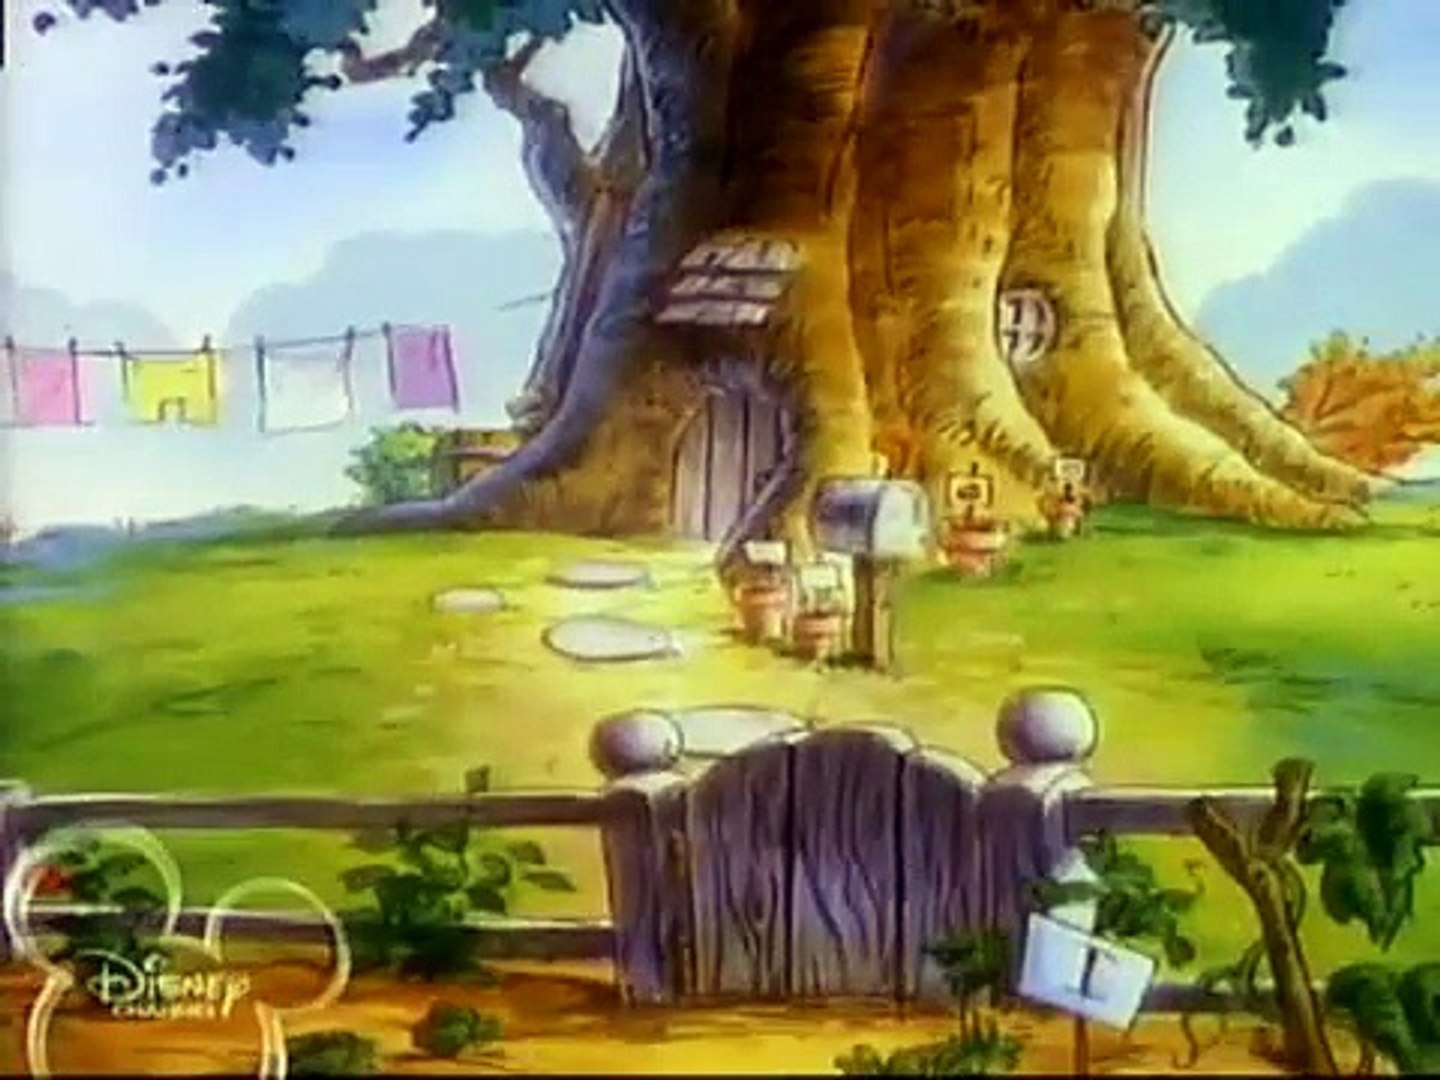 Disney Cartoons Winnie The Pooh Whats the Score, Pooh - Dailymotion Video